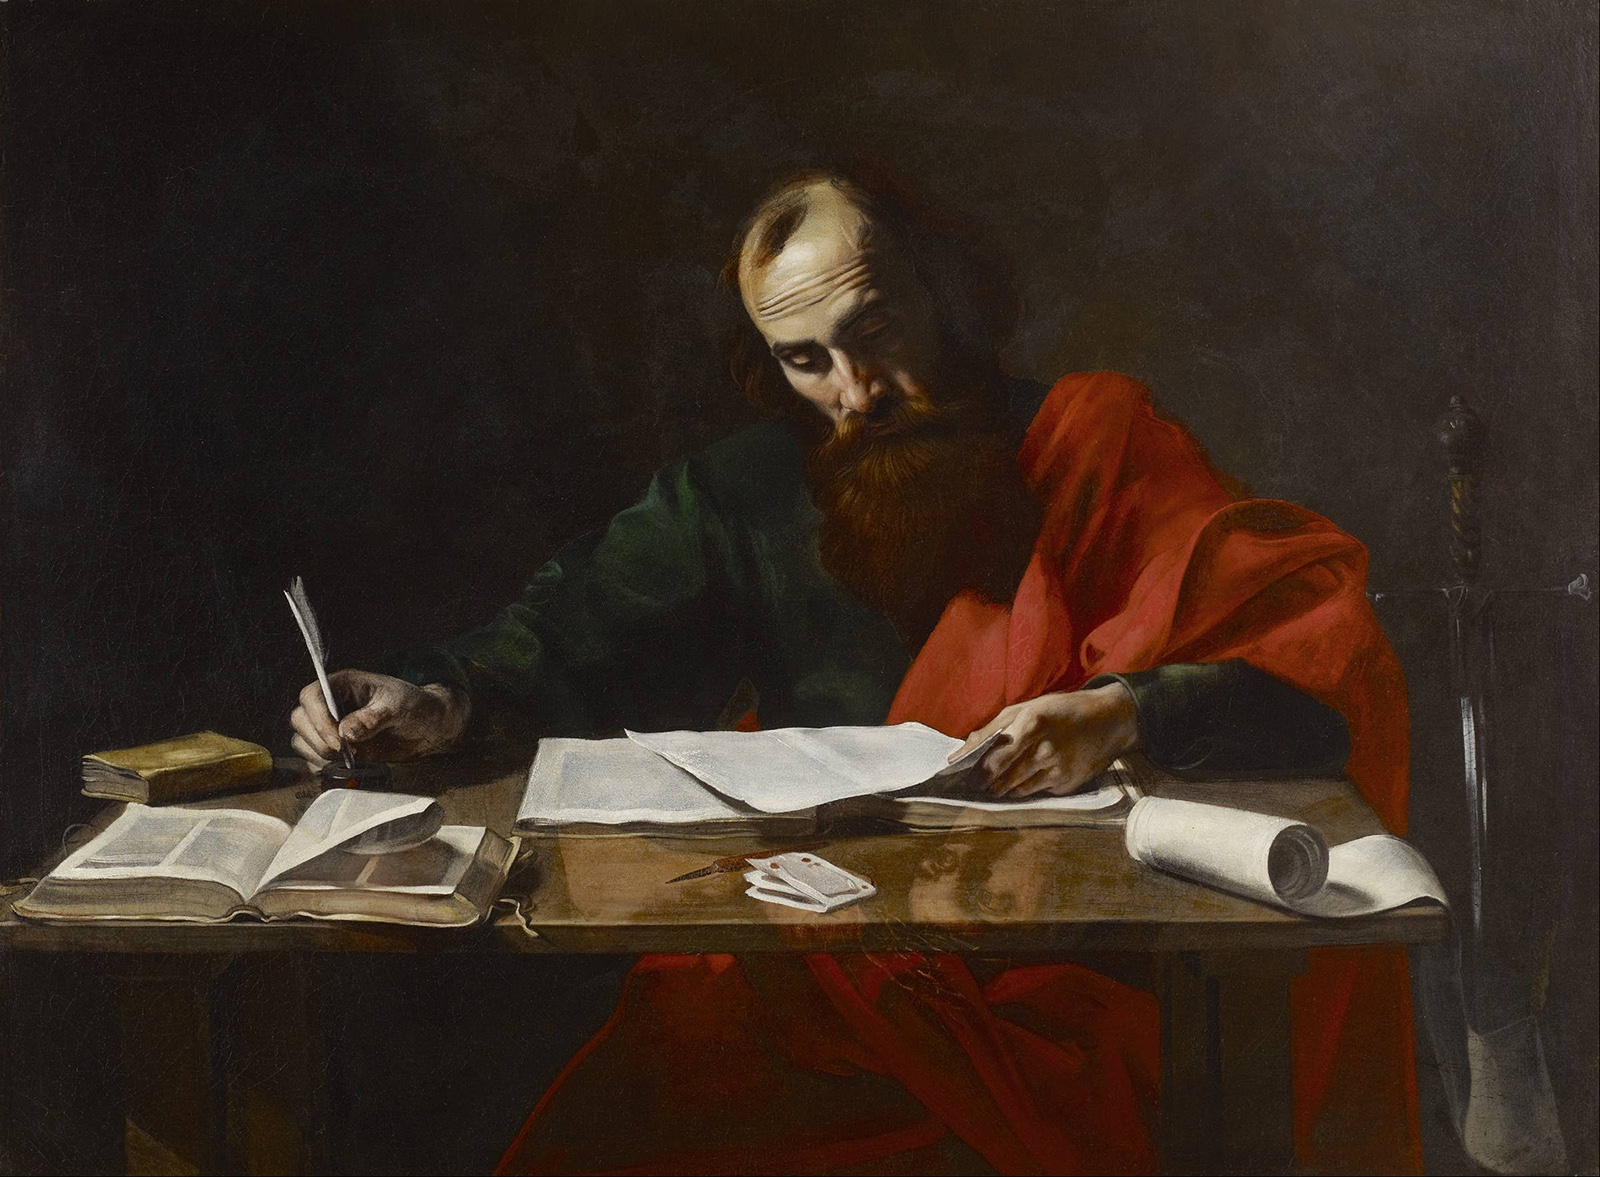 "Saint Paul Writing His Epistles" attributed to Valentin de Boulogne, circa 1620. (Image courtesy of Wikipedia/Creative Commons)